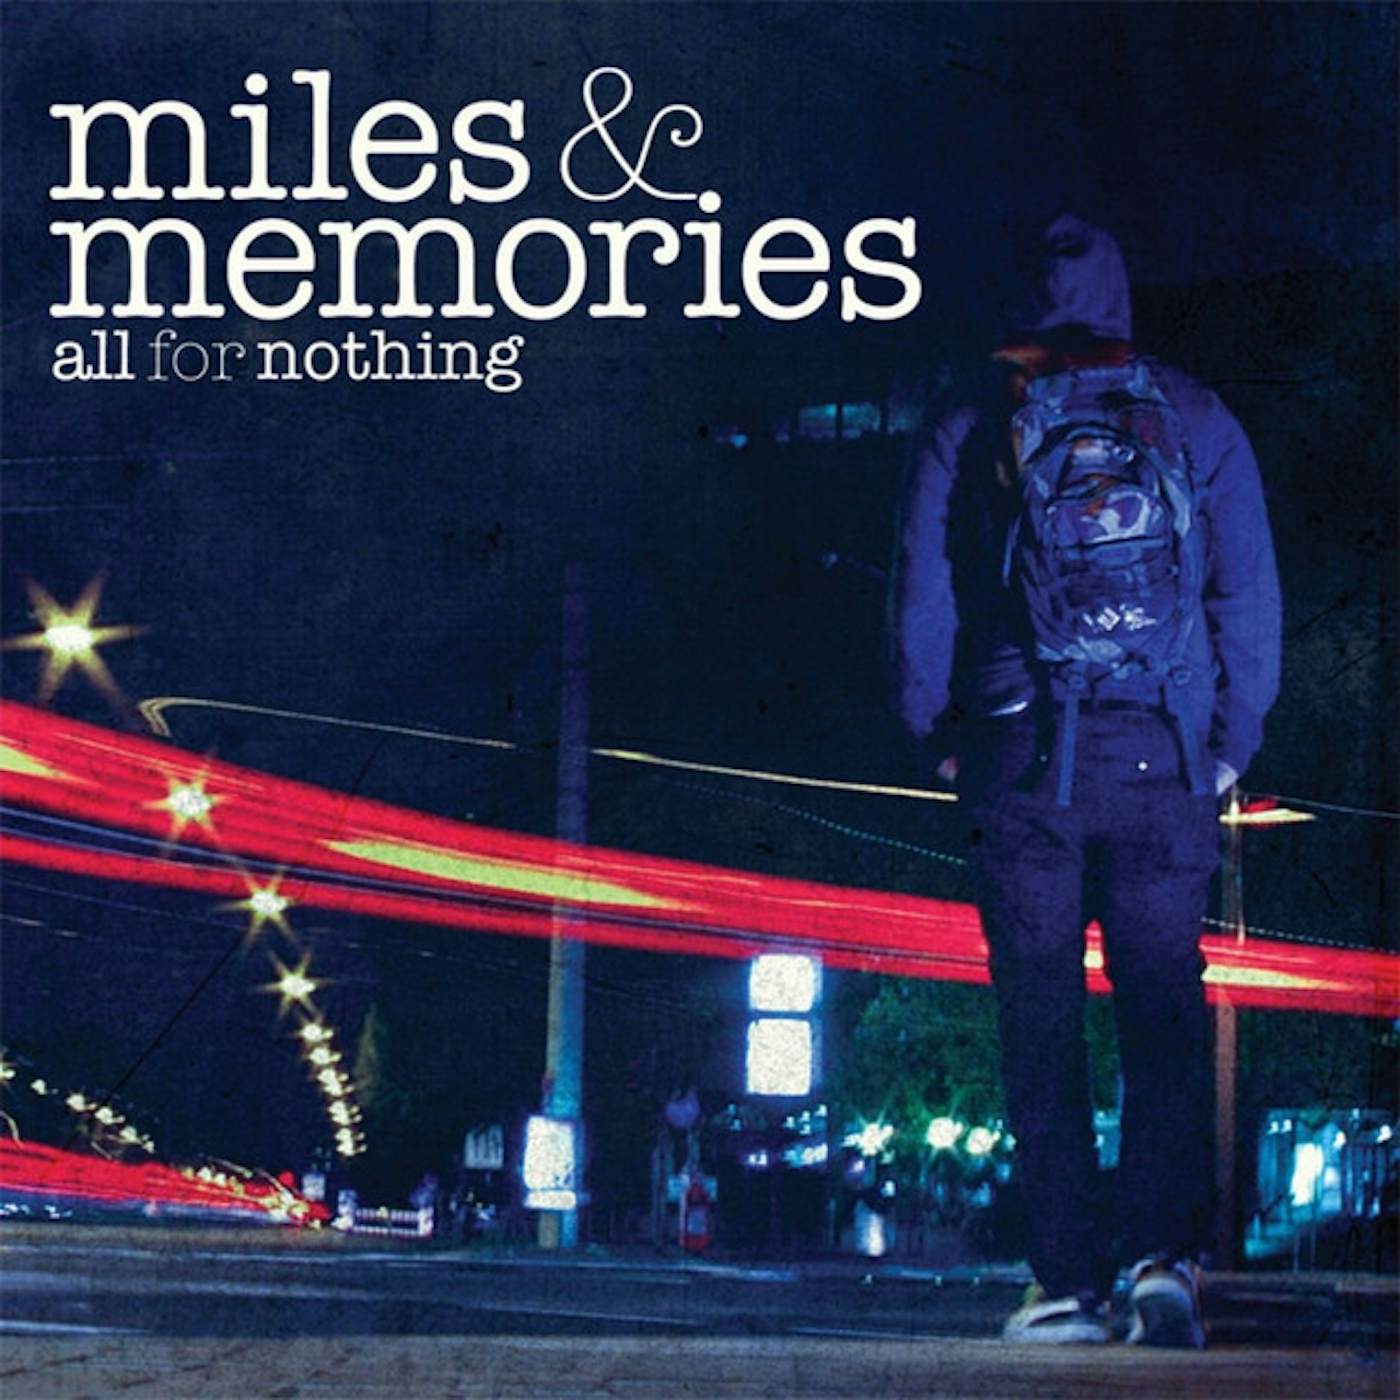 All For Nothing Miles & Memories Vinyl Record